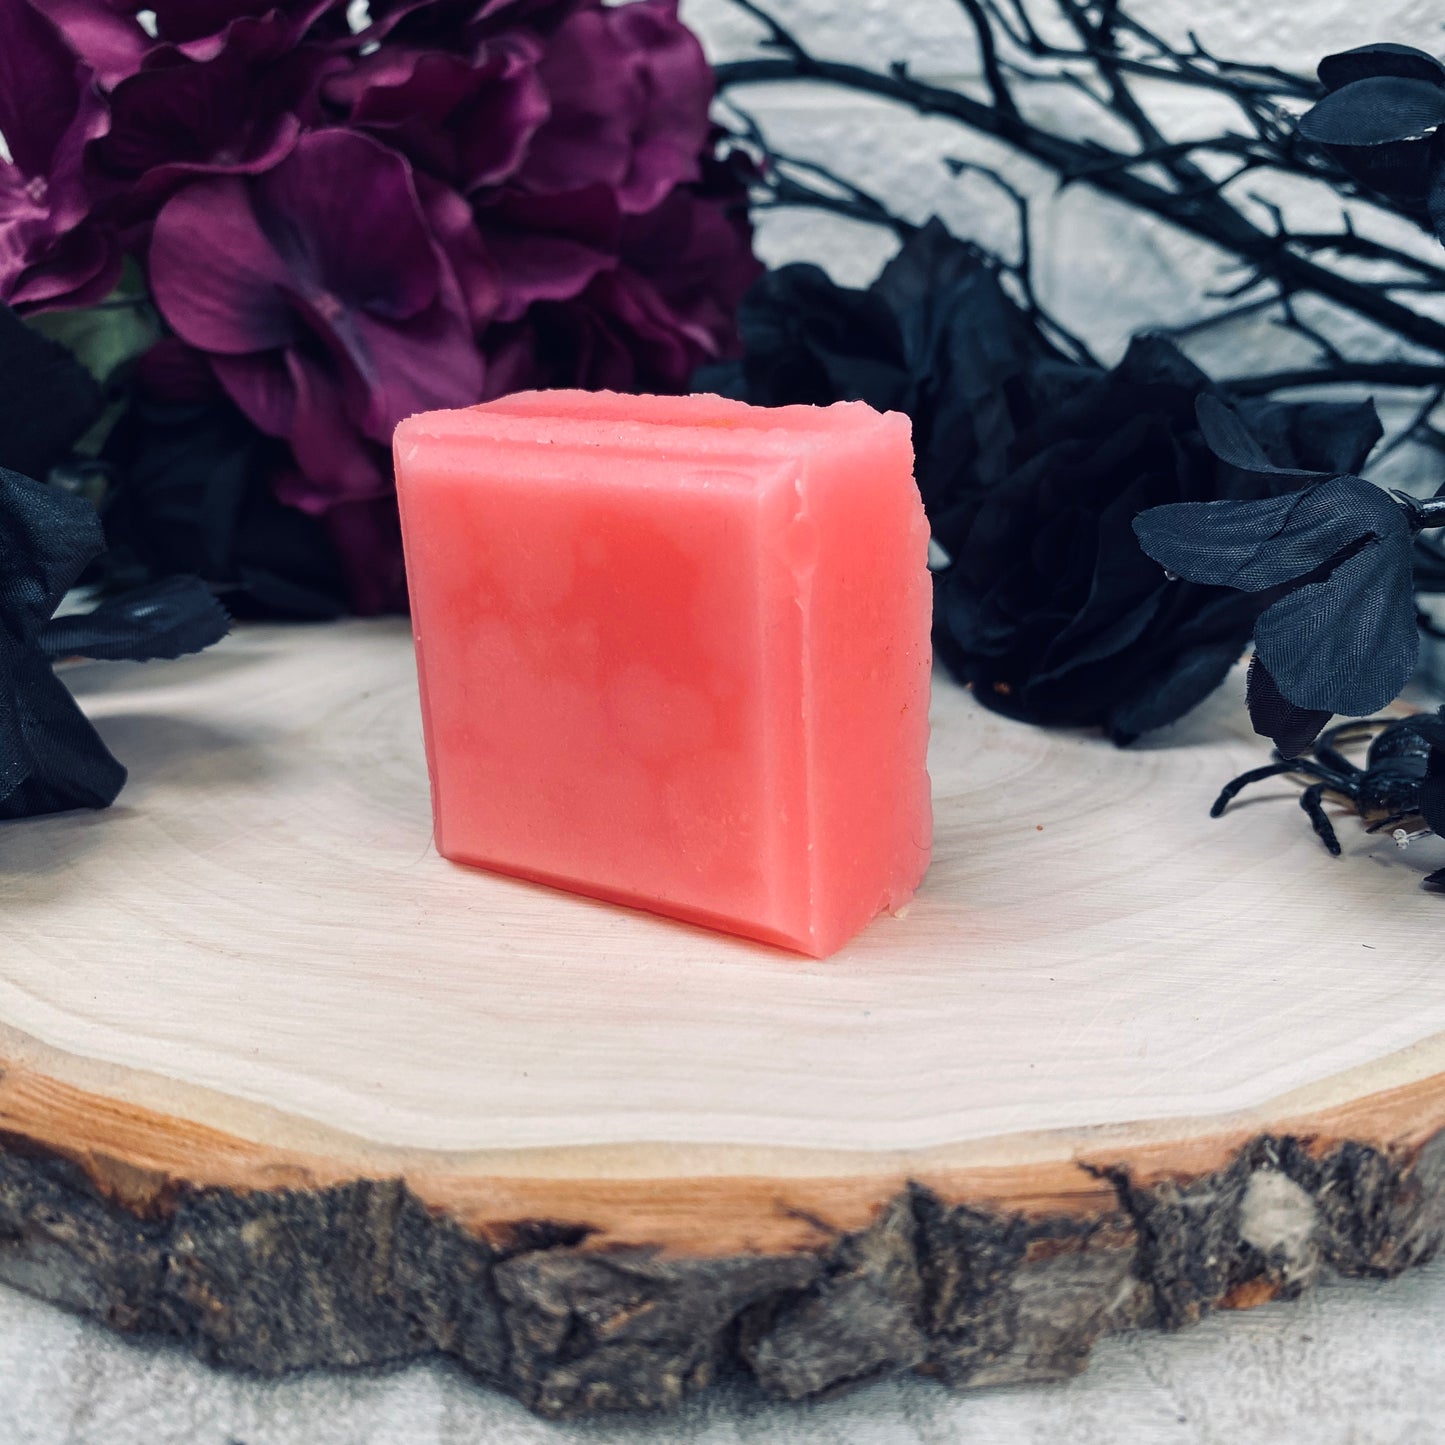 THE BLOOM BLOOM ROOM Conditioner Bar